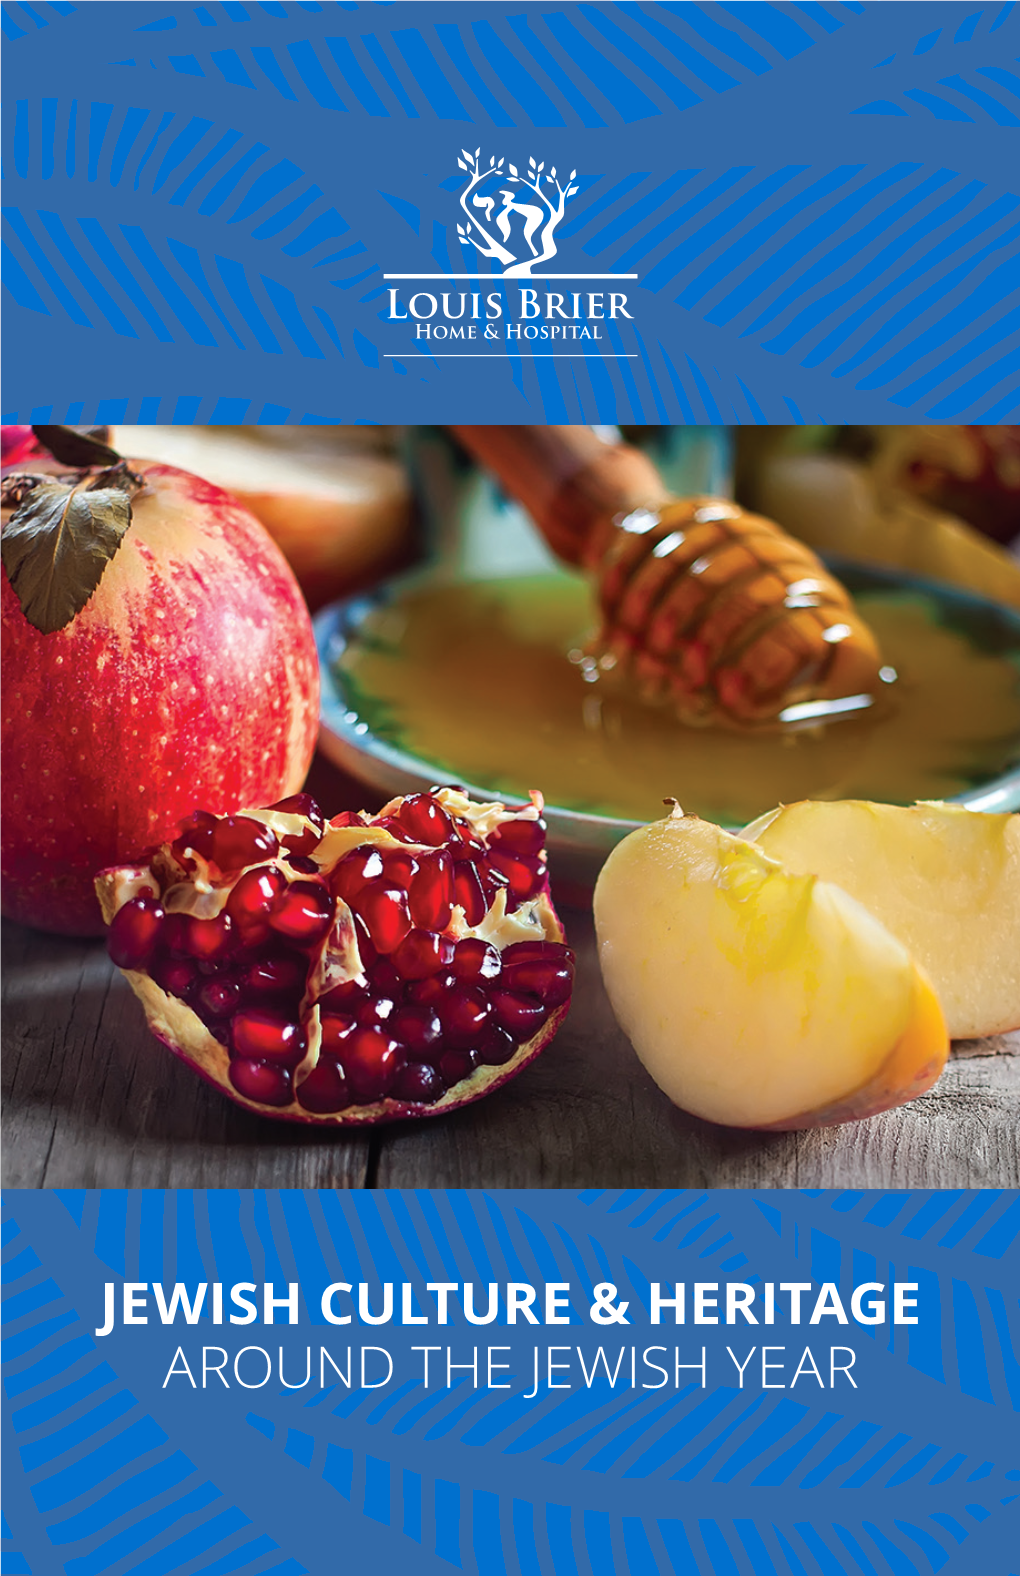 Jewish Culture & Heritage at the Louis Brier